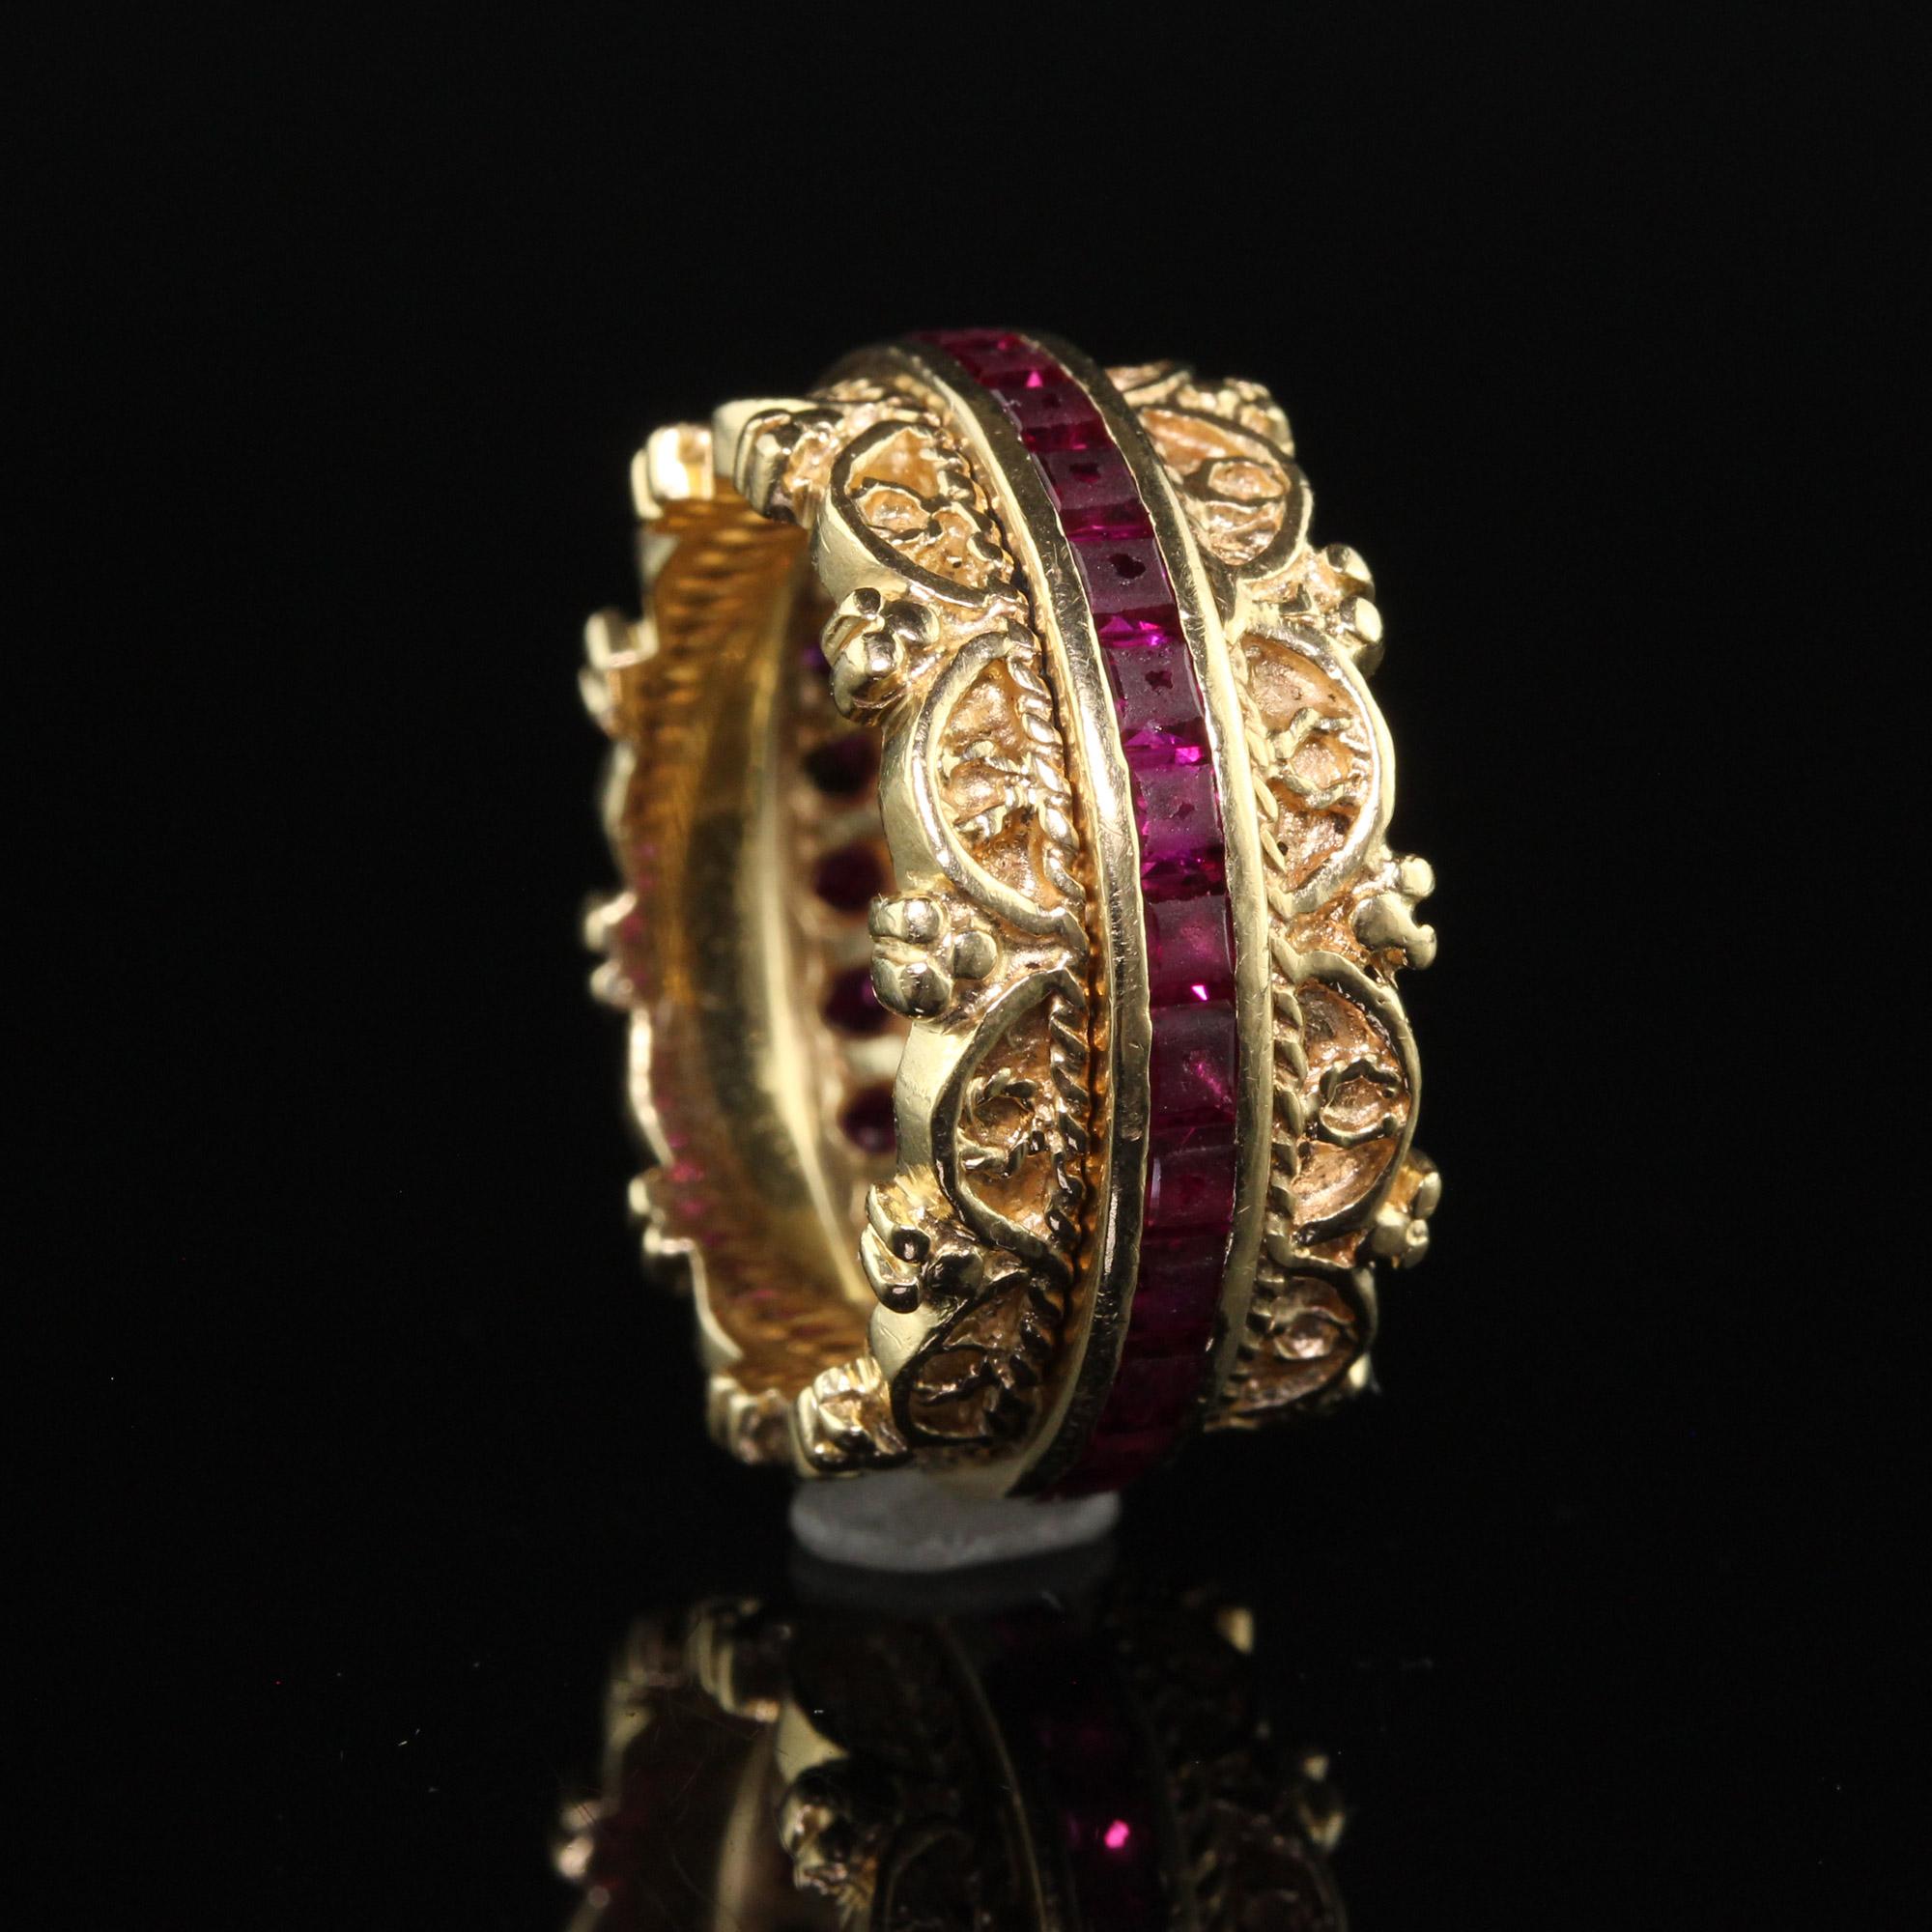 Women's Vintage Estate 14K Yellow Gold Square Cut Ruby Wide Eternity Band - Size 6 1/4